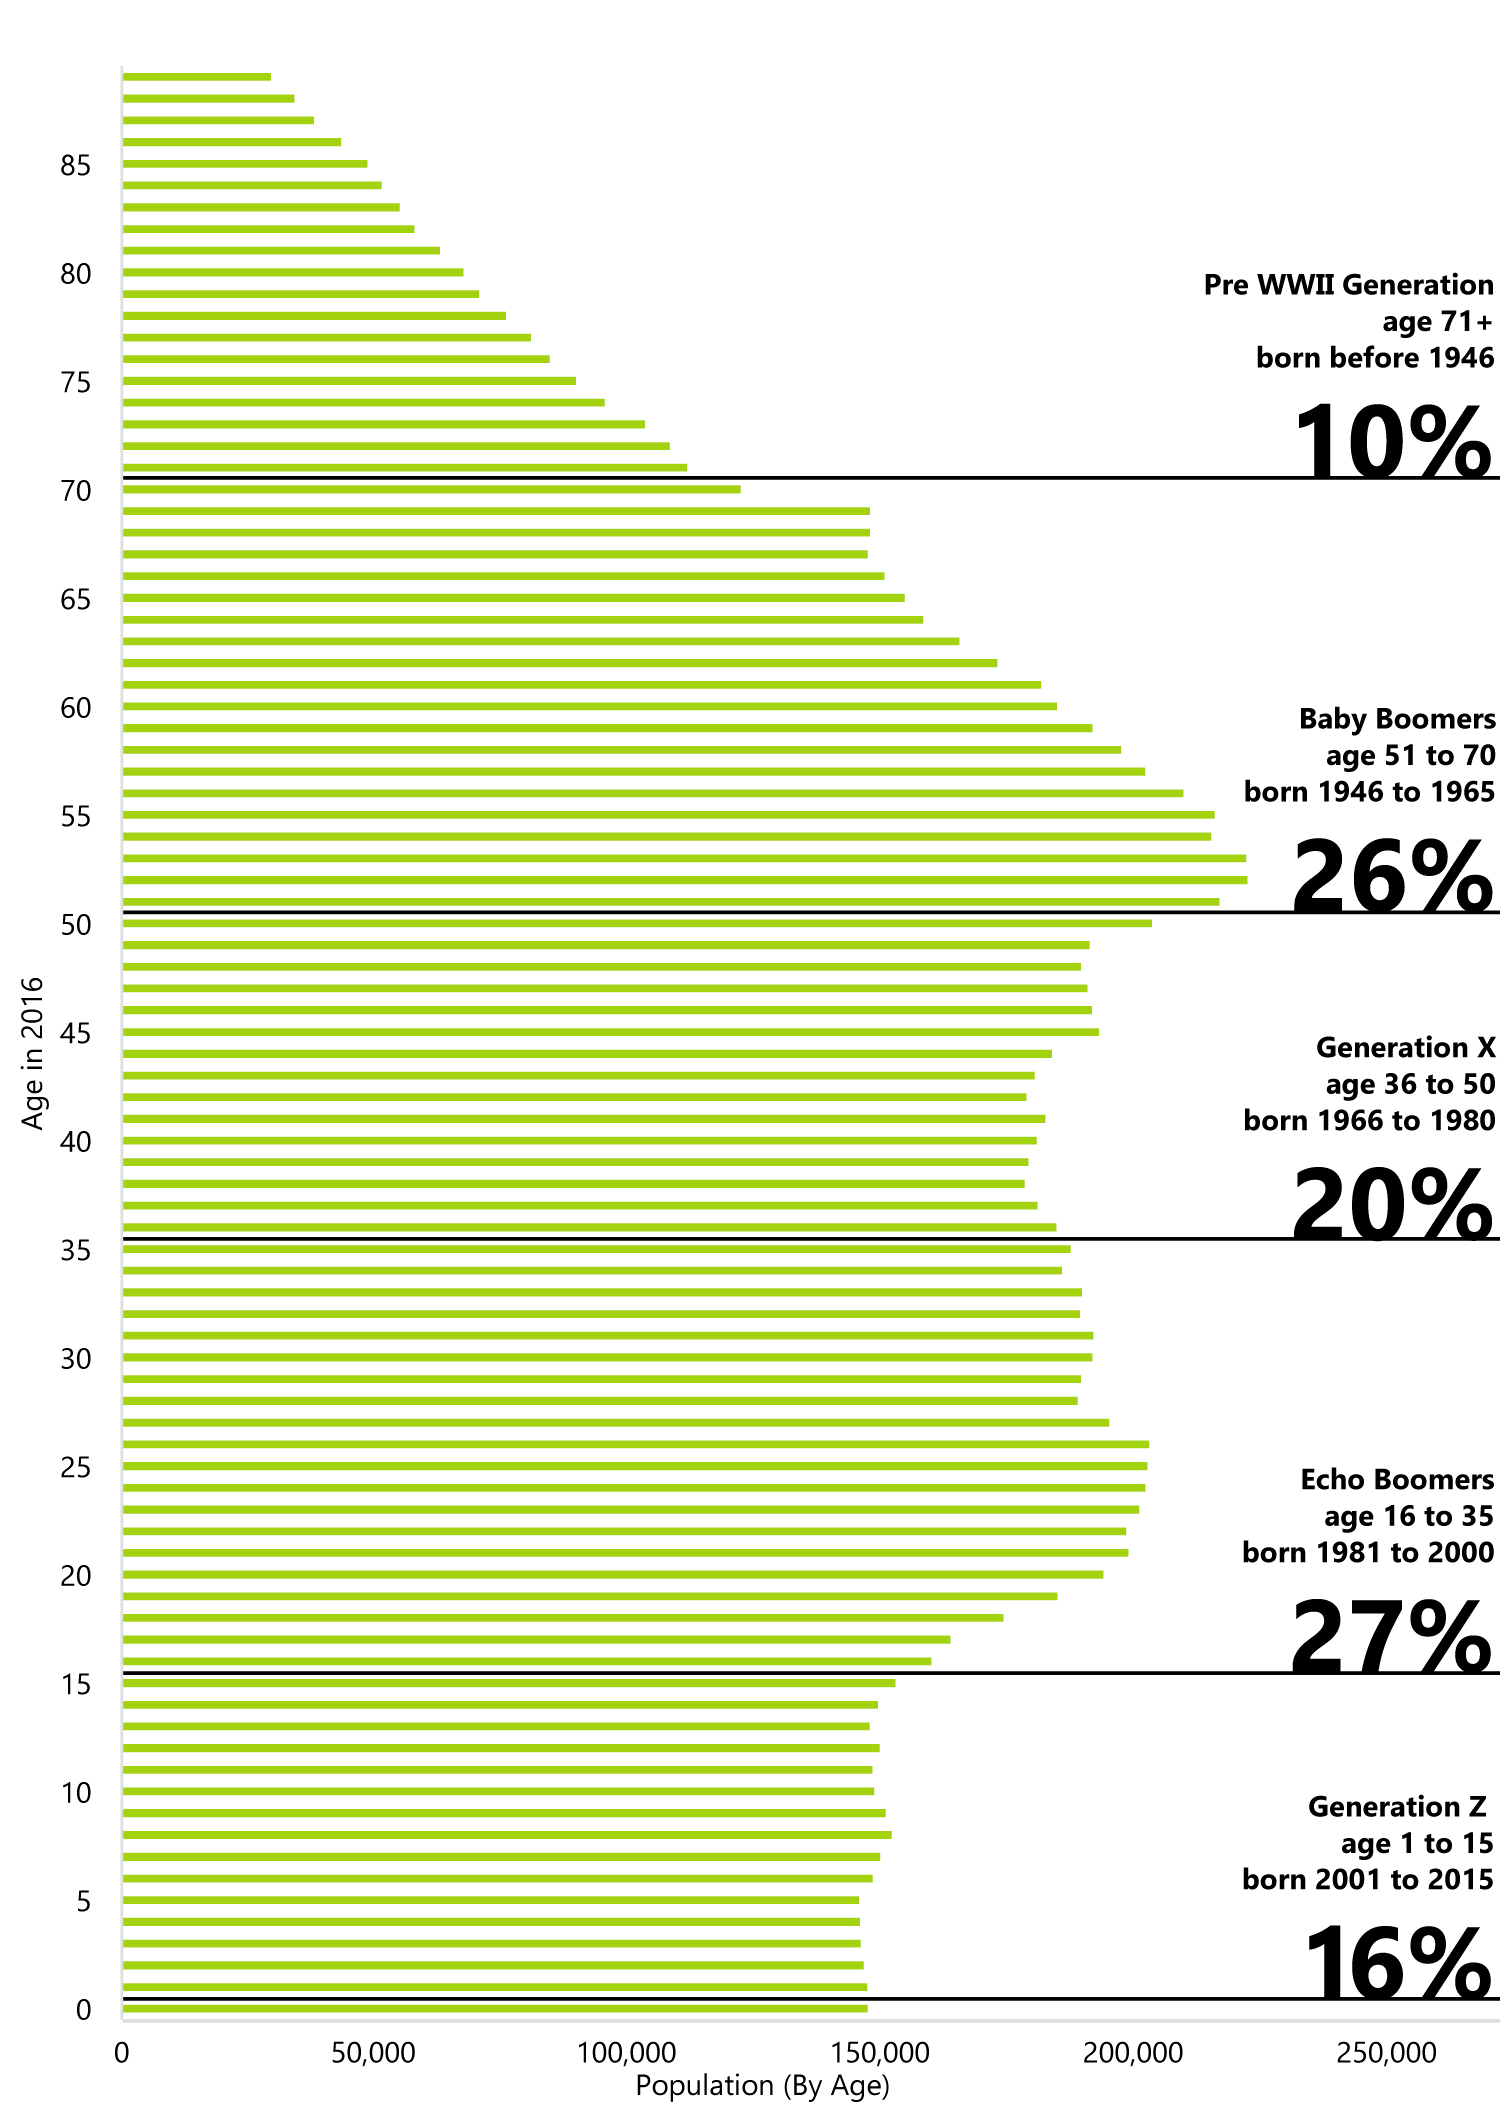 Ontario’s Age Distribution in 2016